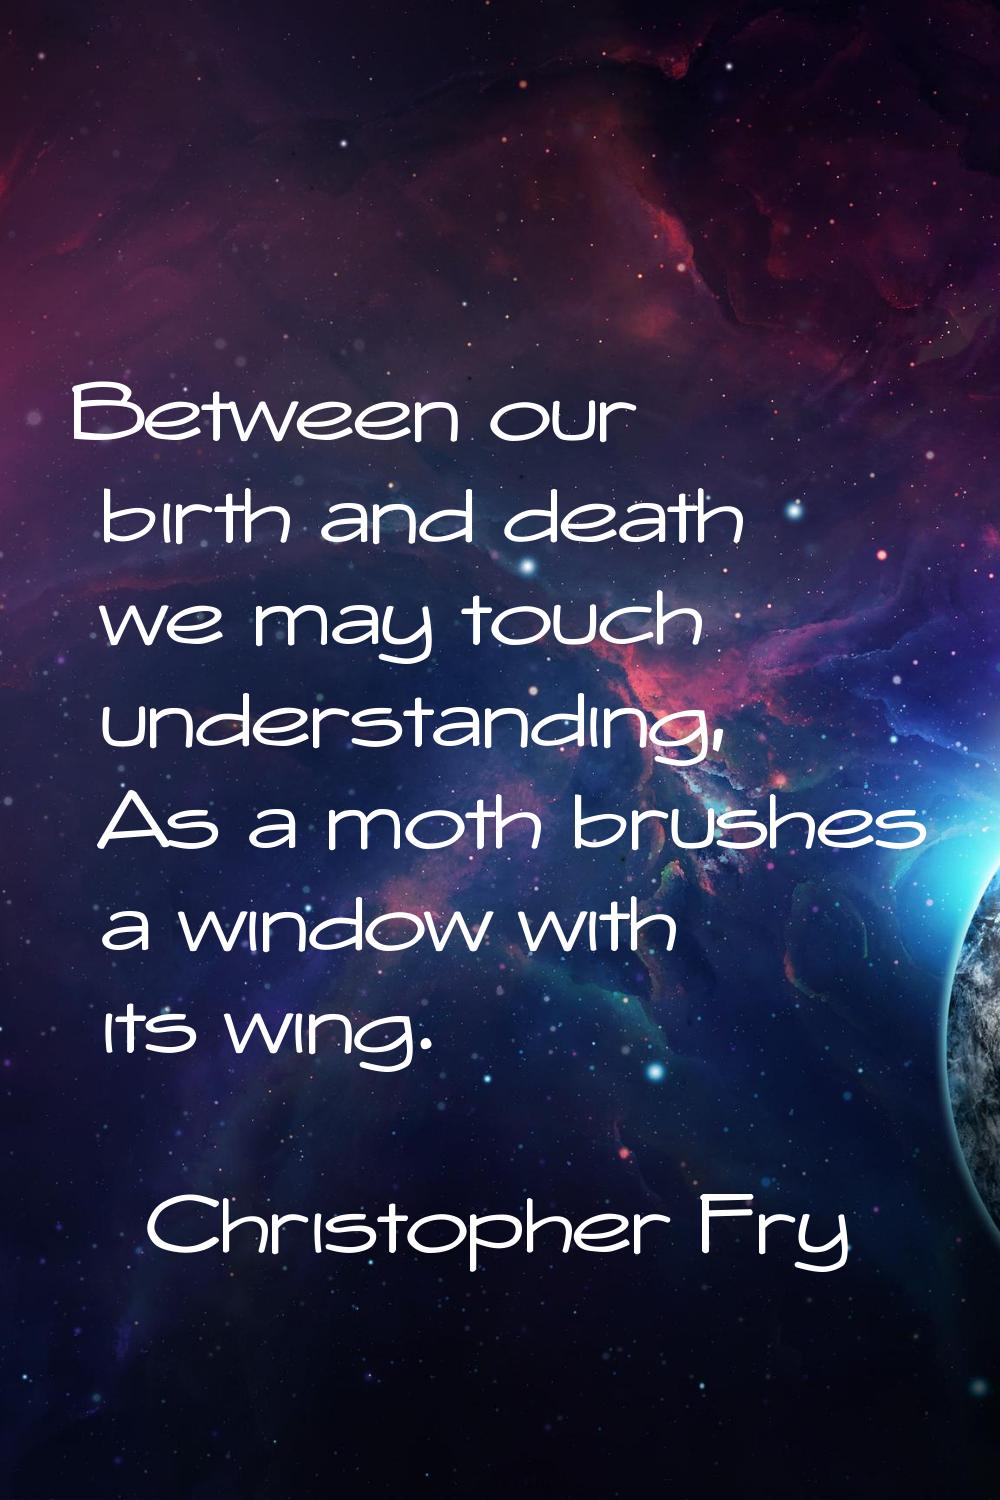 Between our birth and death we may touch understanding, As a moth brushes a window with its wing.